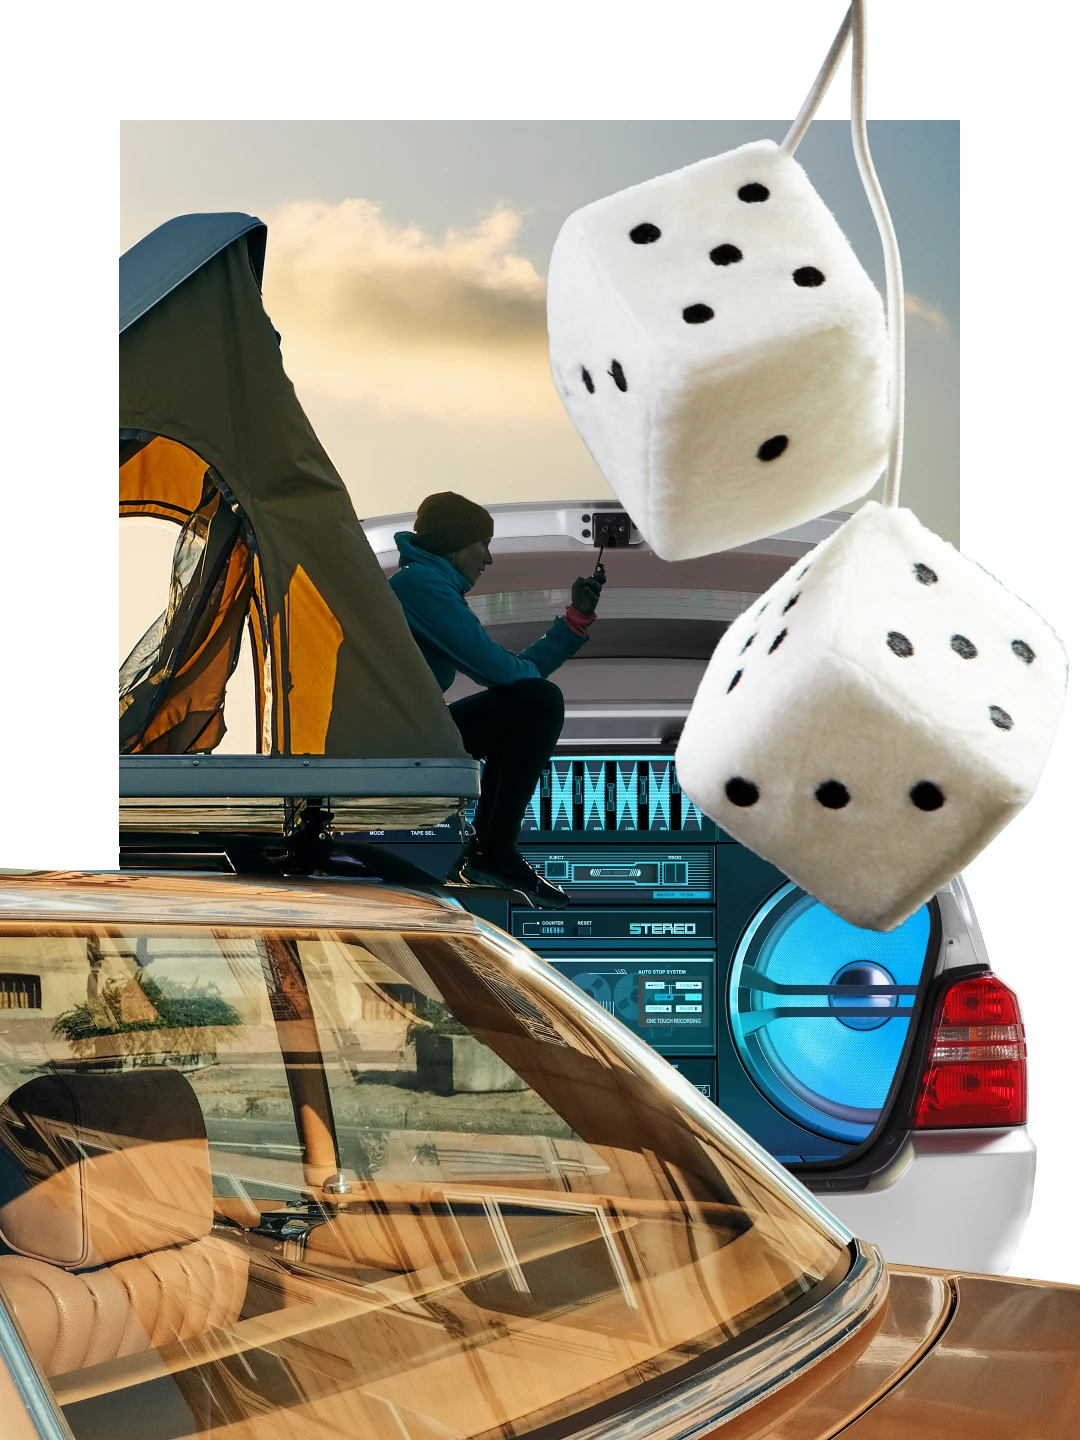 Collage of car-themed items. A boom box is in the background, in front of a blue sky with white clouds. A person is looking at a mobile phone near a tent on the upper left-hand side. Two large furry dice are on the right. On the bottom left, there is a view through the back window of a brown car.
